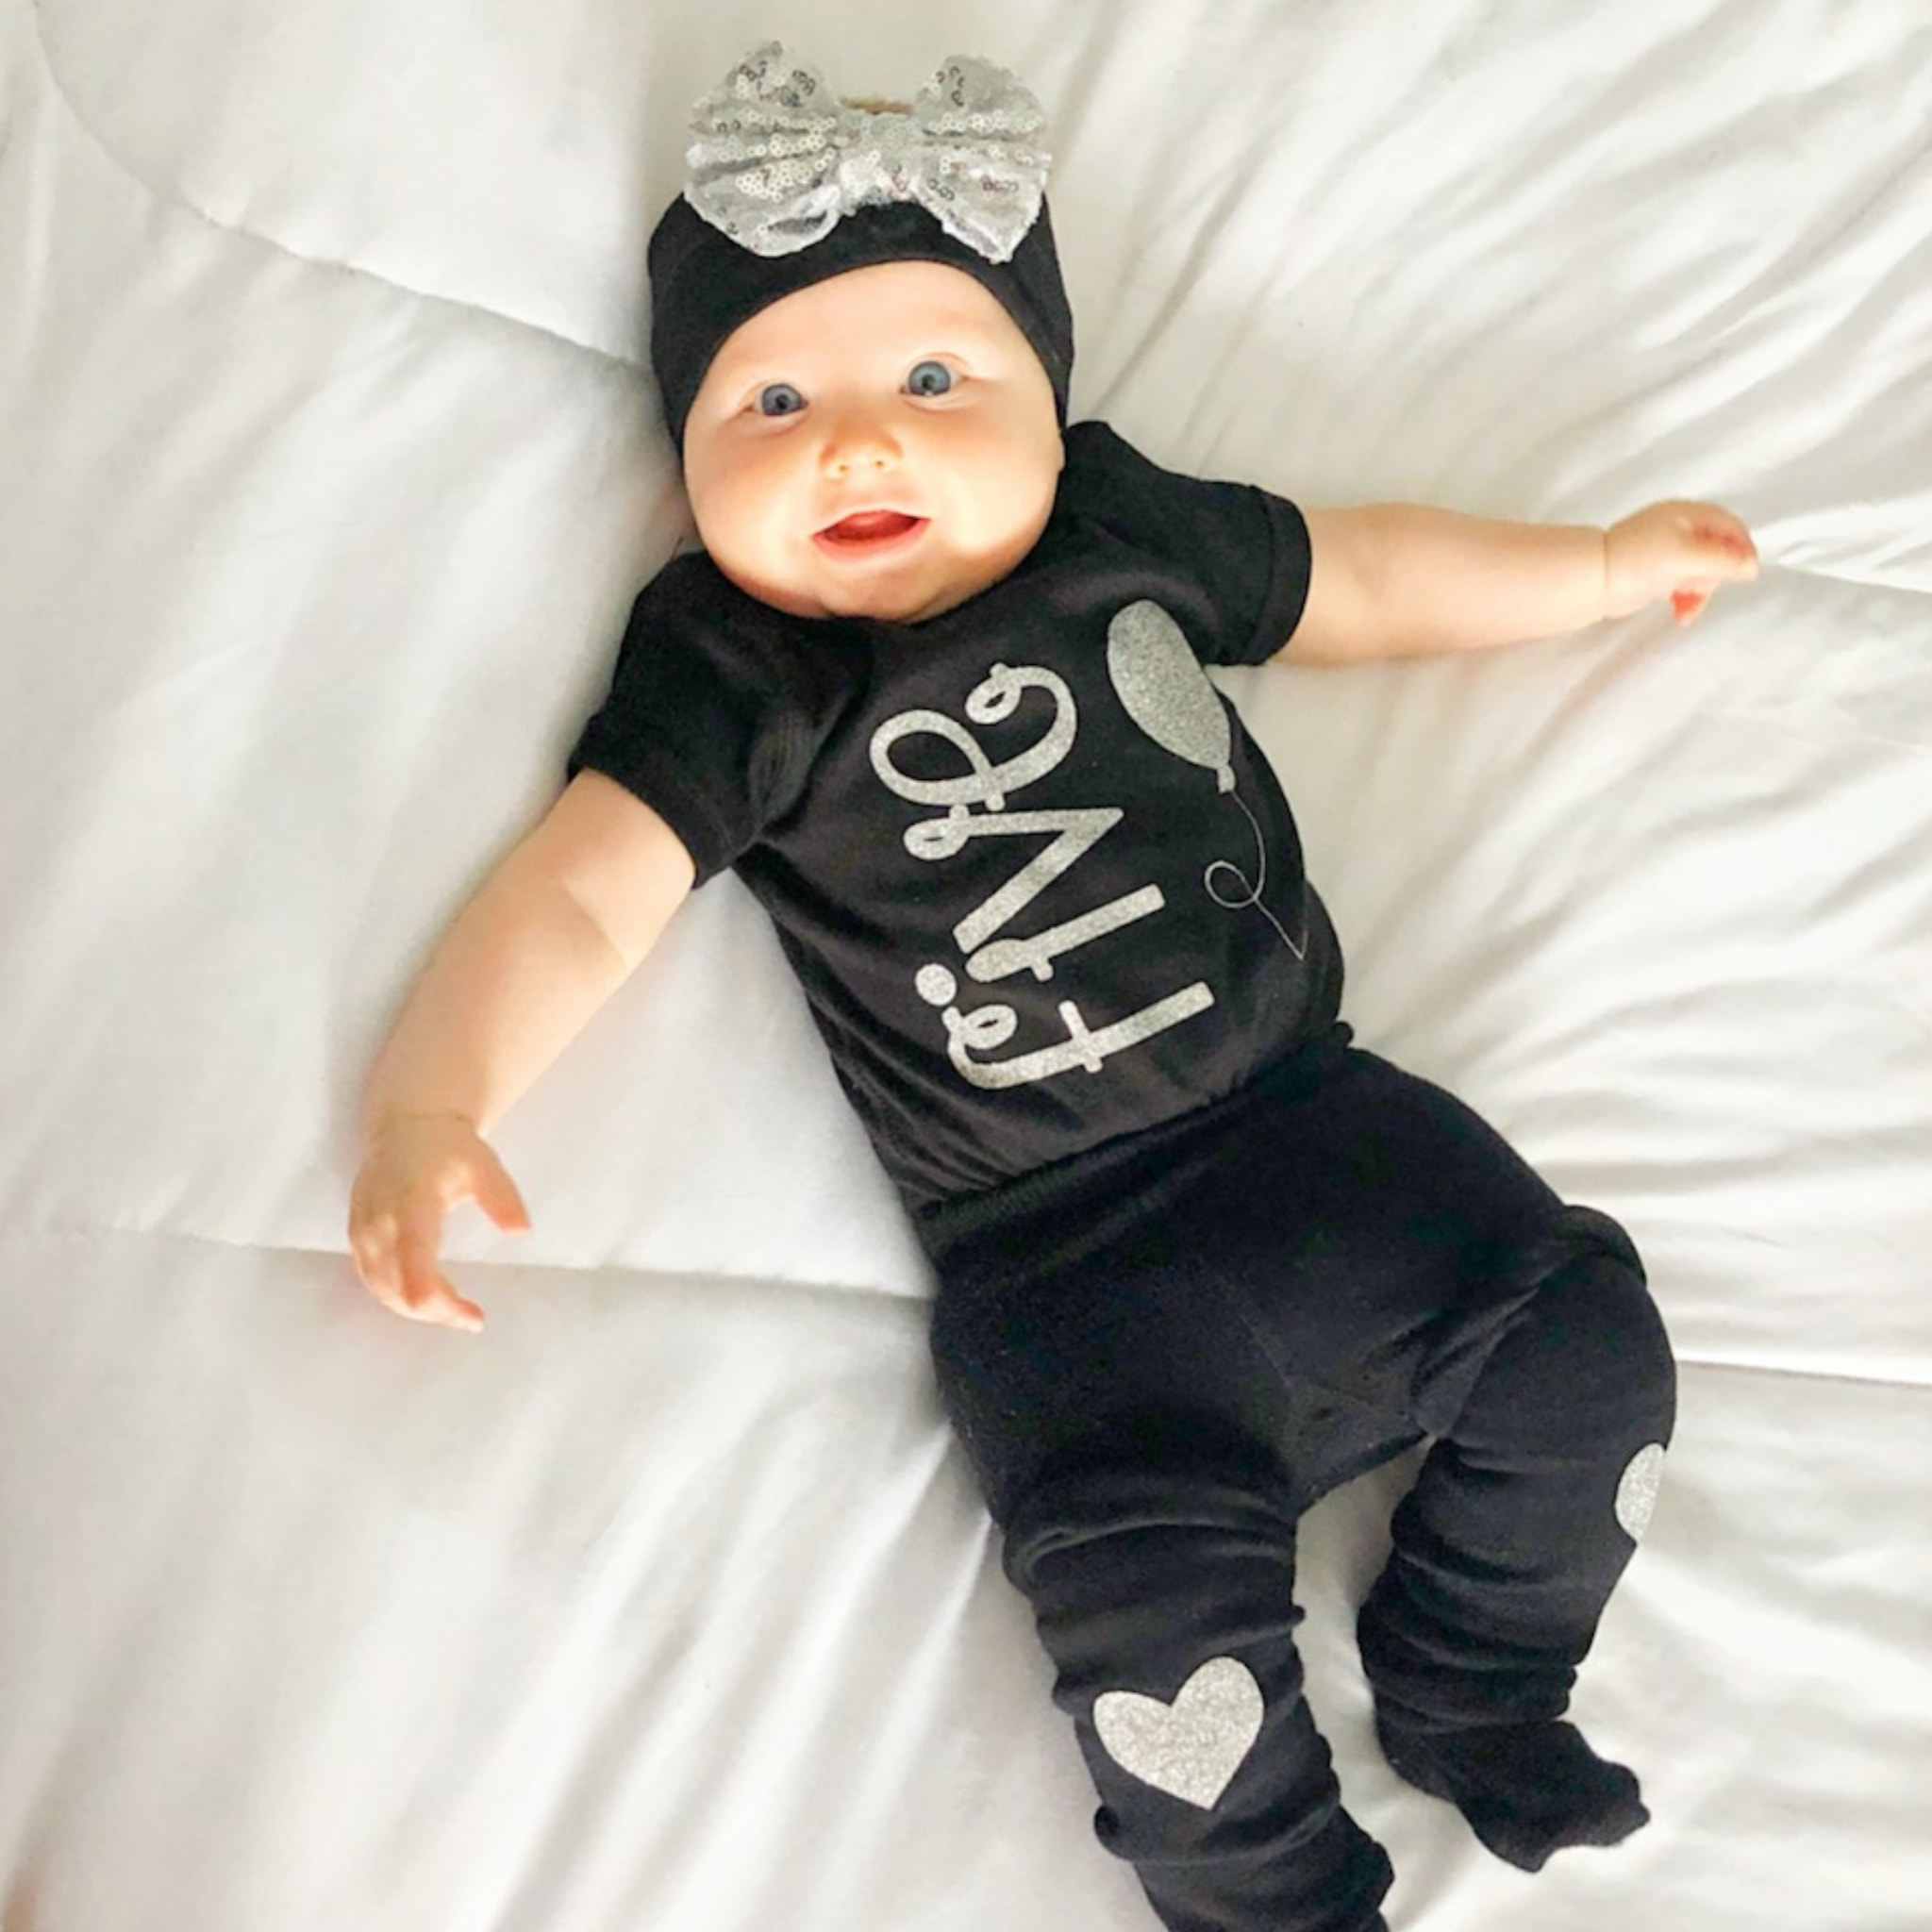 5 month old baby girl clothes